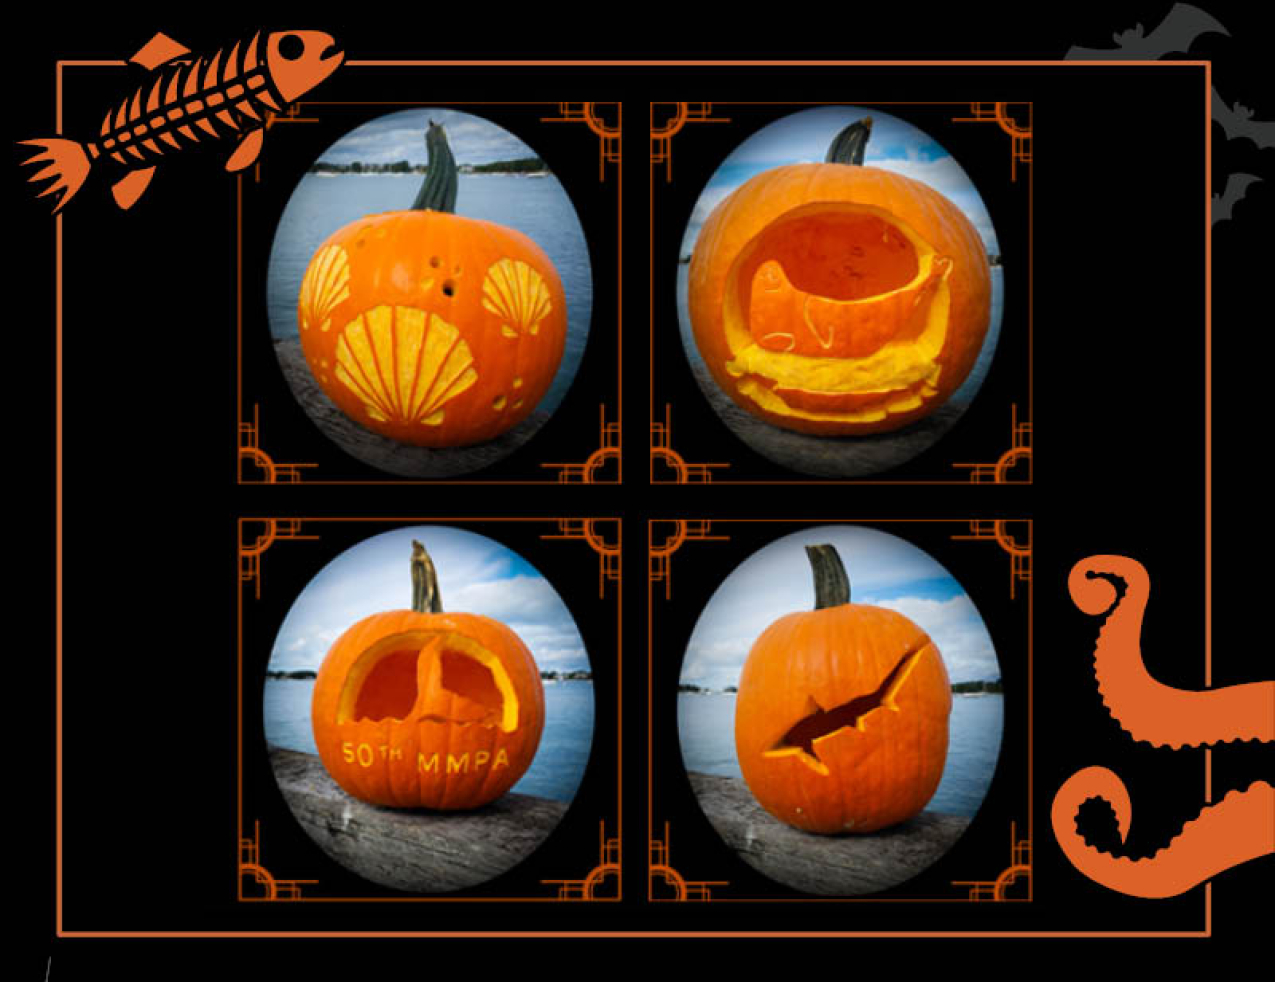 Four jack-o-lanterns carved with scallop shells, a seal, a shark, and whale tail that says "50th MMPA." Border of the photo is black with orange sea creature graphics of octopus tentacles and a fish skeleton. Text: Pumpkin stencils for ocean lovers, #NOAASpookyScience with NOAA logo.